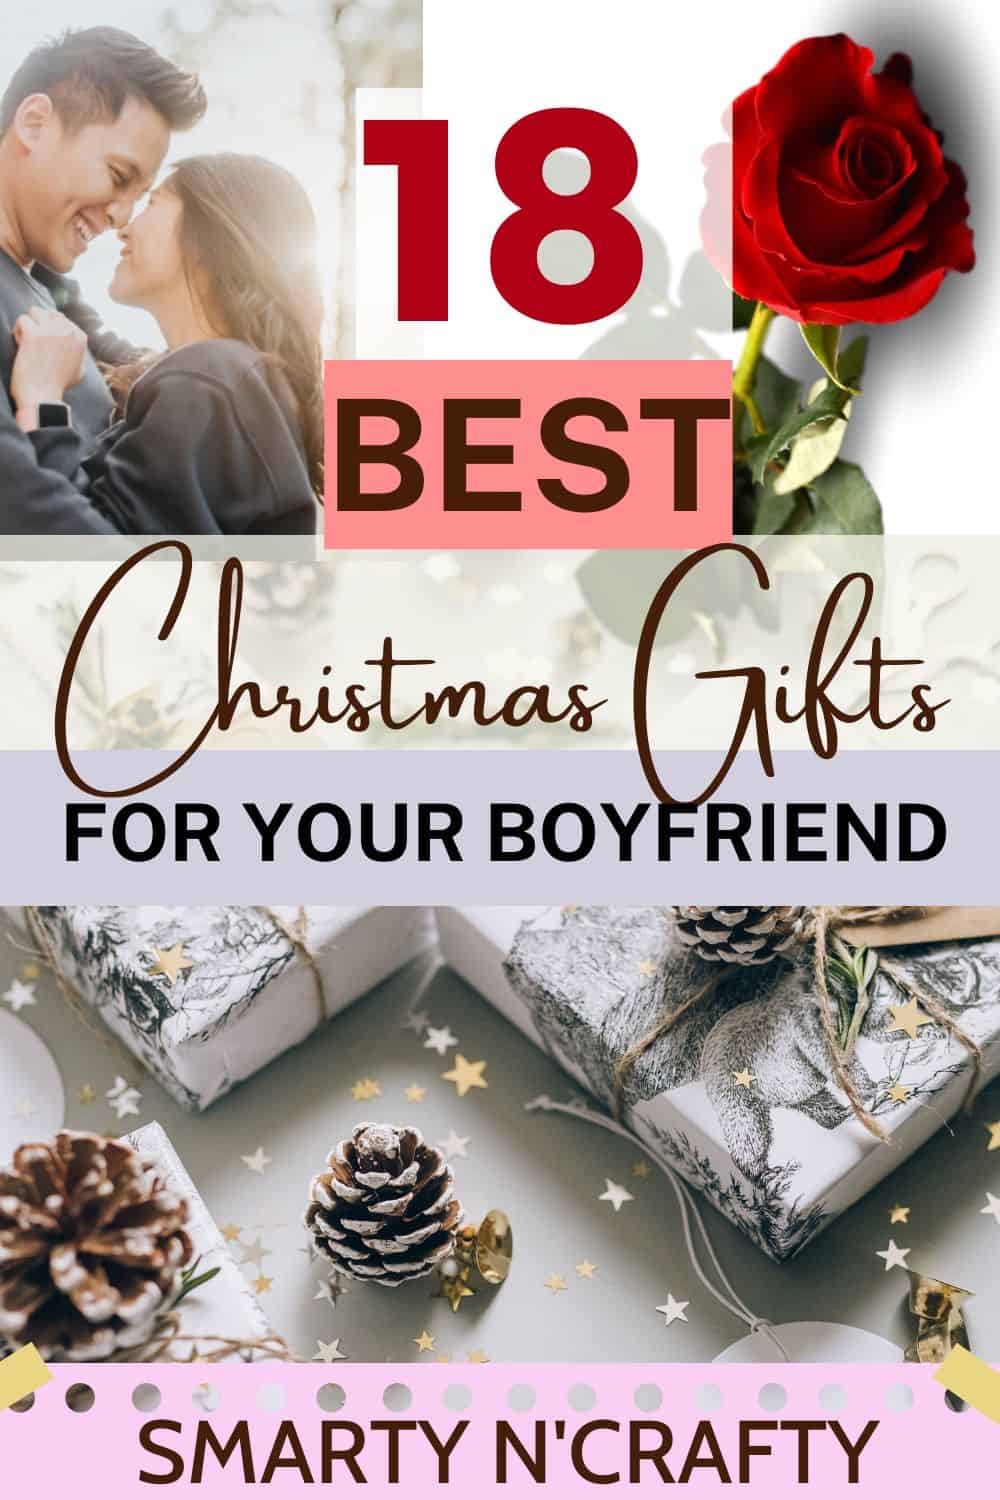 Christmas gifts for your boyfriend